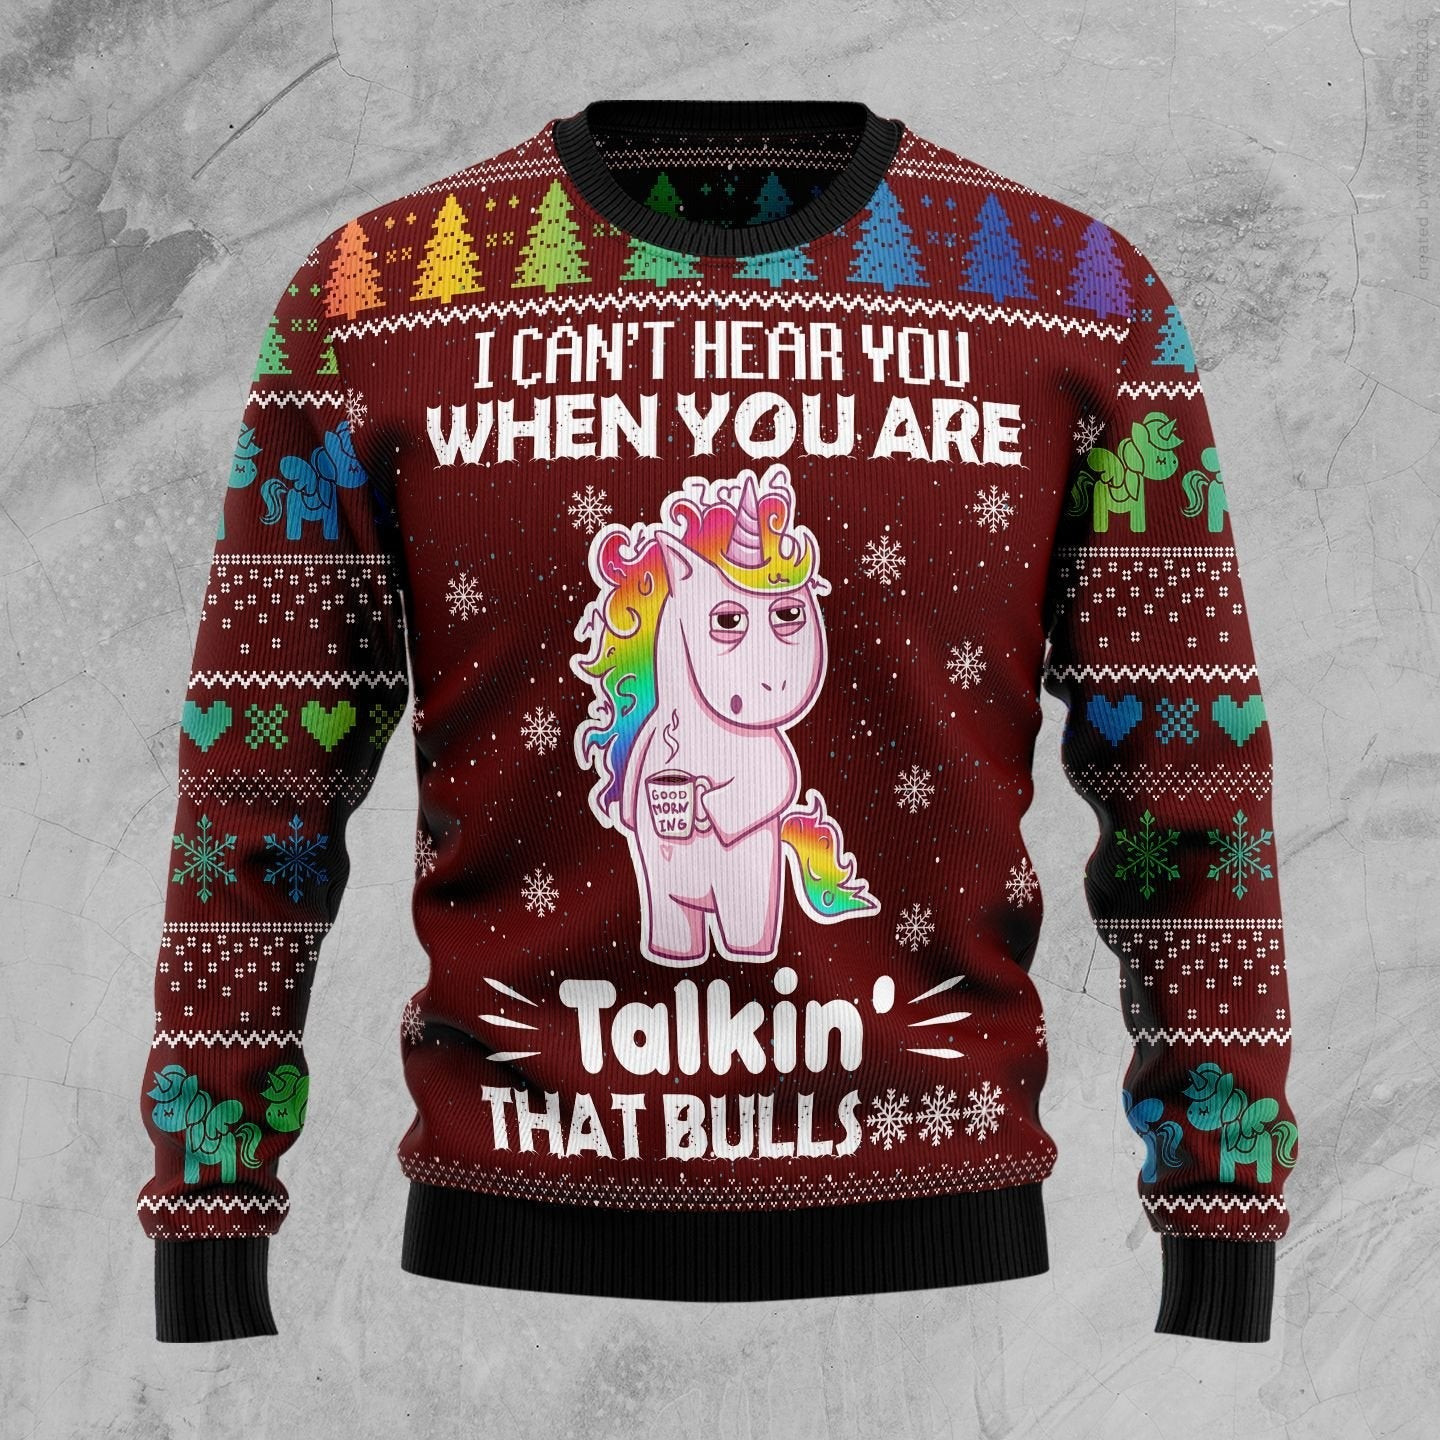 Cant Hear You Unicorn Ugly Christmas Sweater Ugly Sweater For Men Women, Holiday Sweater